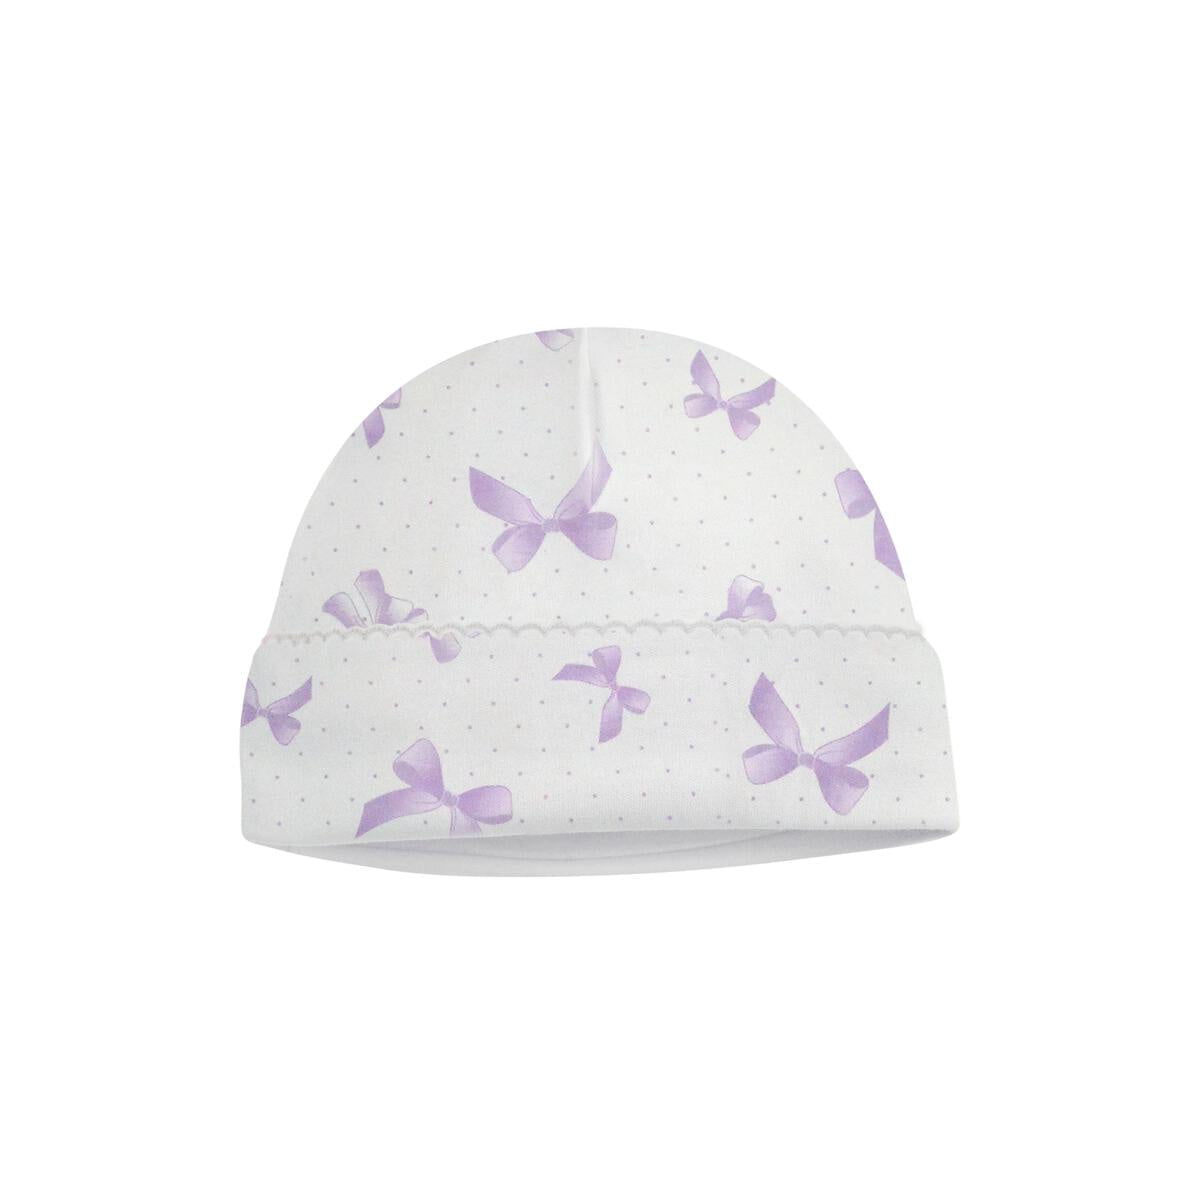 Lyda Baby Lila Bows Hat Lavender PP07-7124 5007